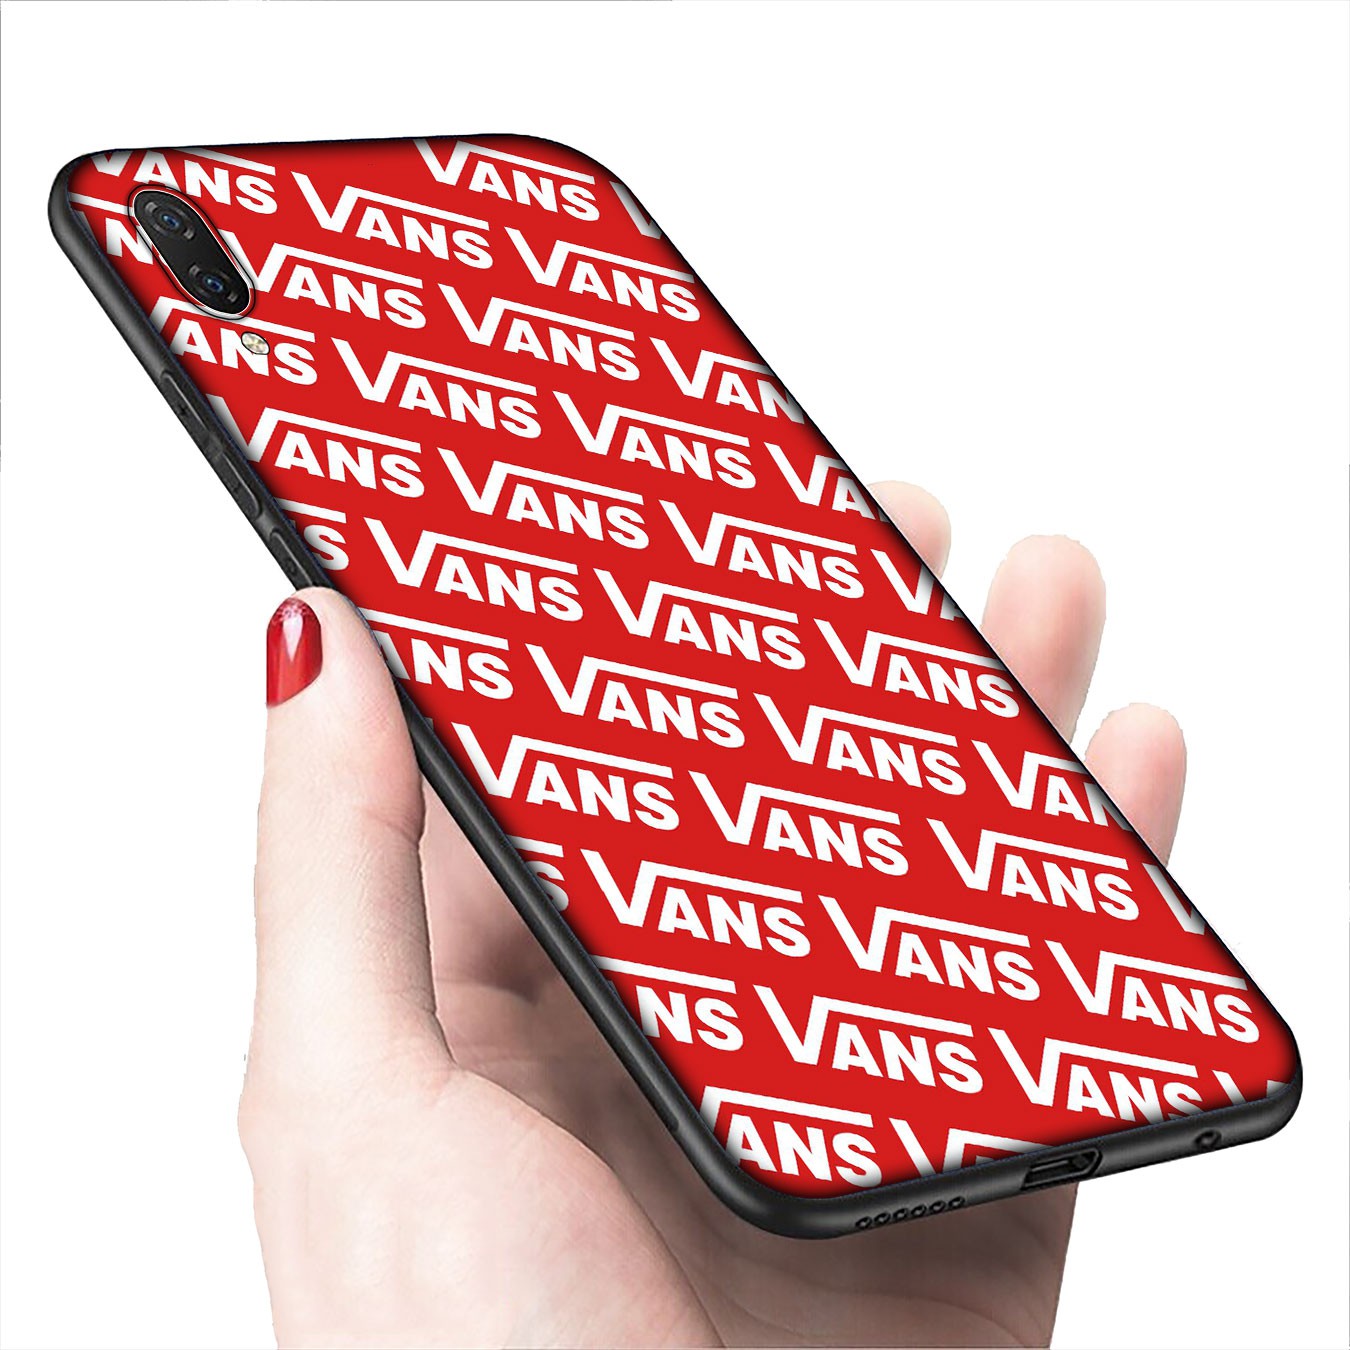 Soft Silicone iPhone 11 Pro XR X XS Max 7 8 6 6s Plus + Cover VANS Fashion Phone Case